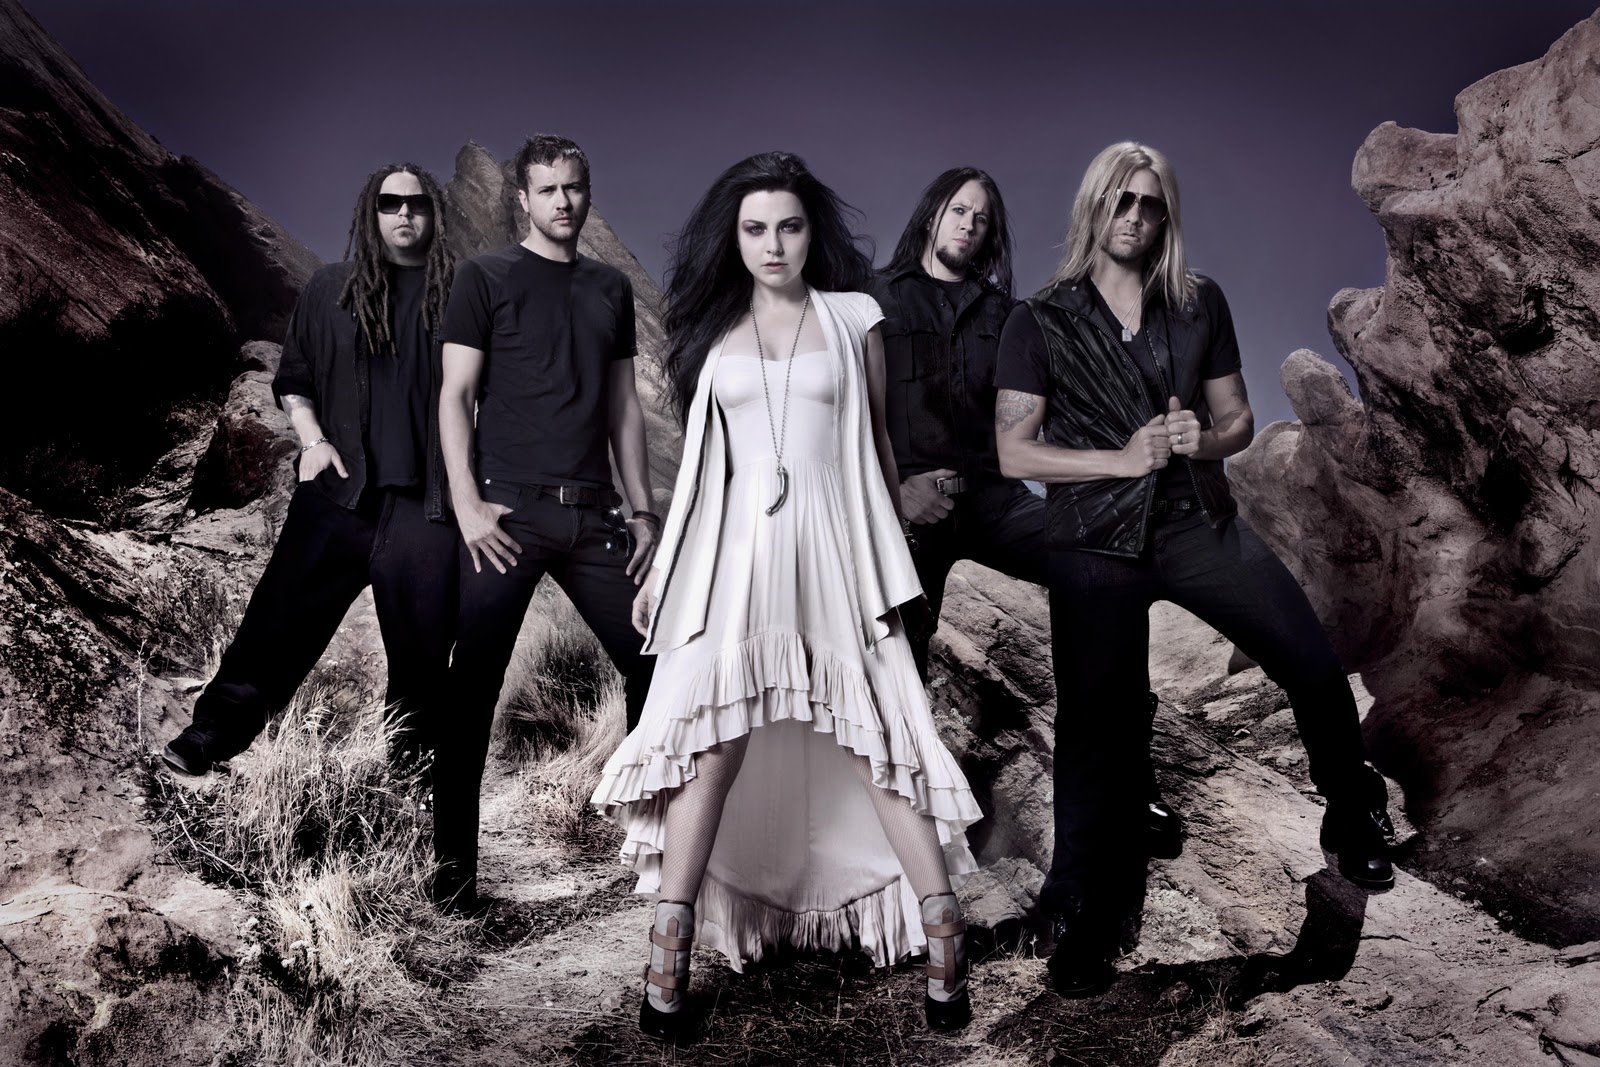 Evanescence Pics, Music Collection